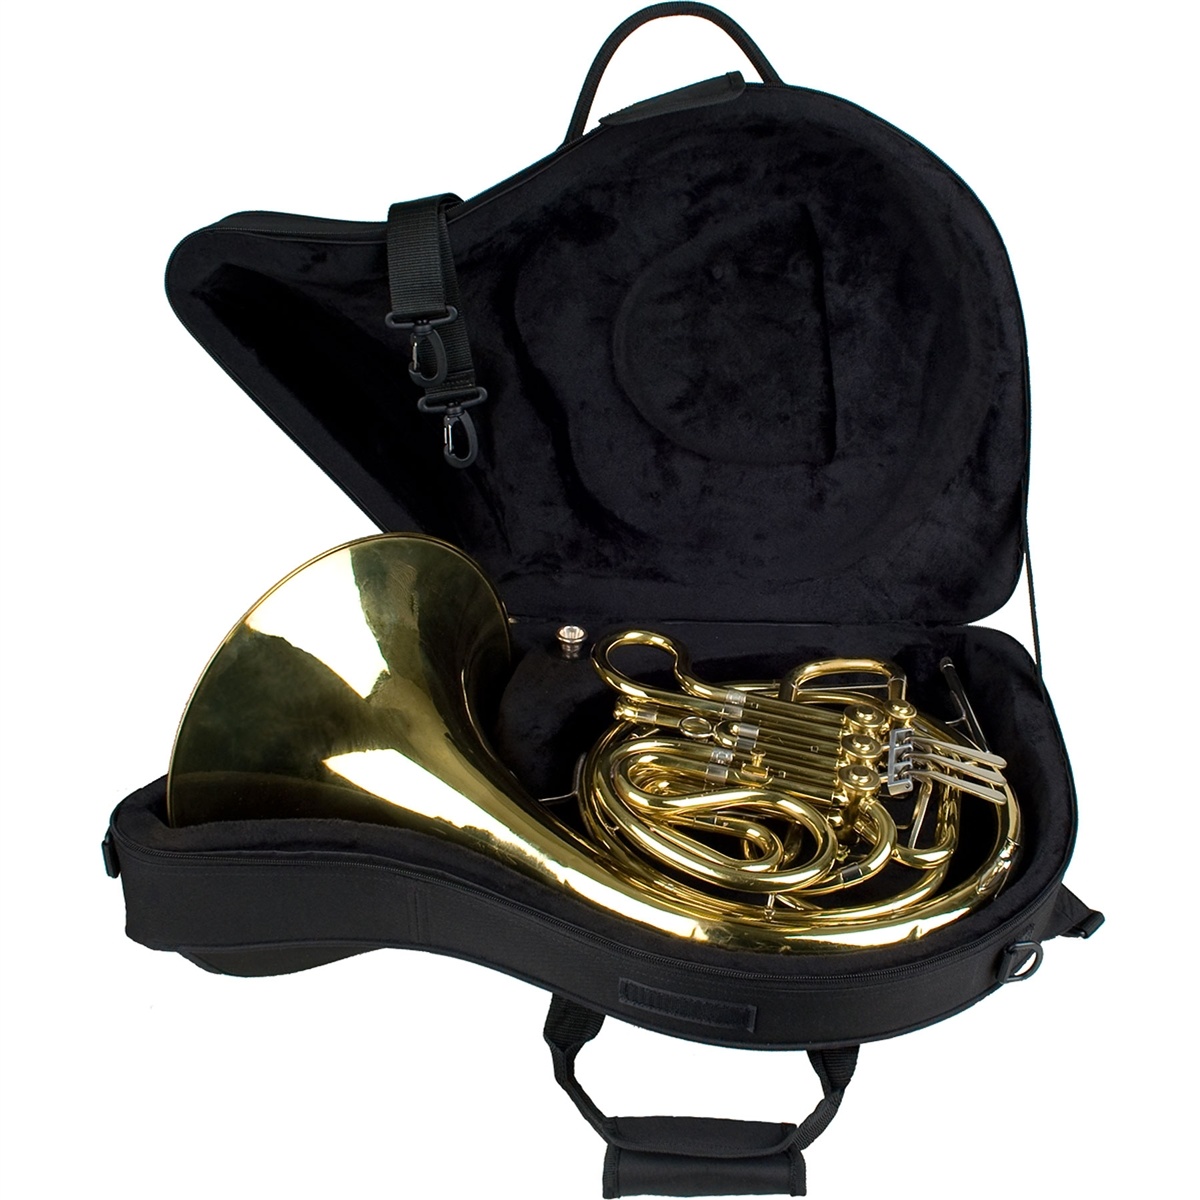 Protec Protec MX316CT MAX Contoured French Horn Case